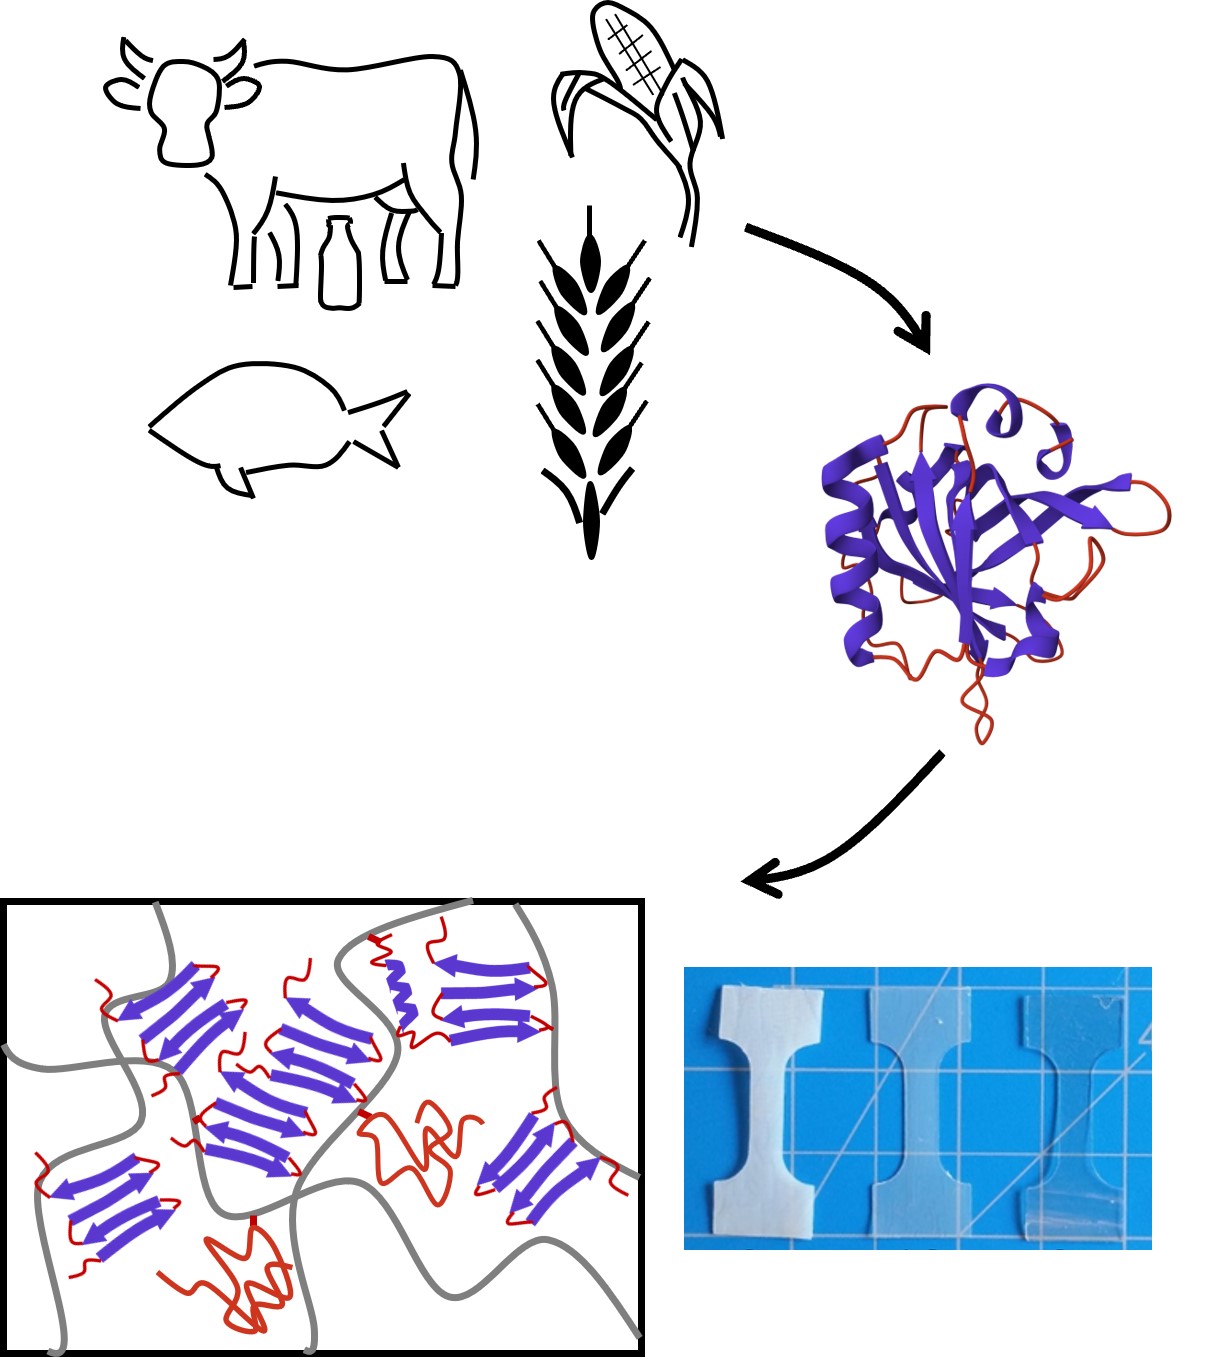 Research diagram of the path to process proteins into protein-based plastics